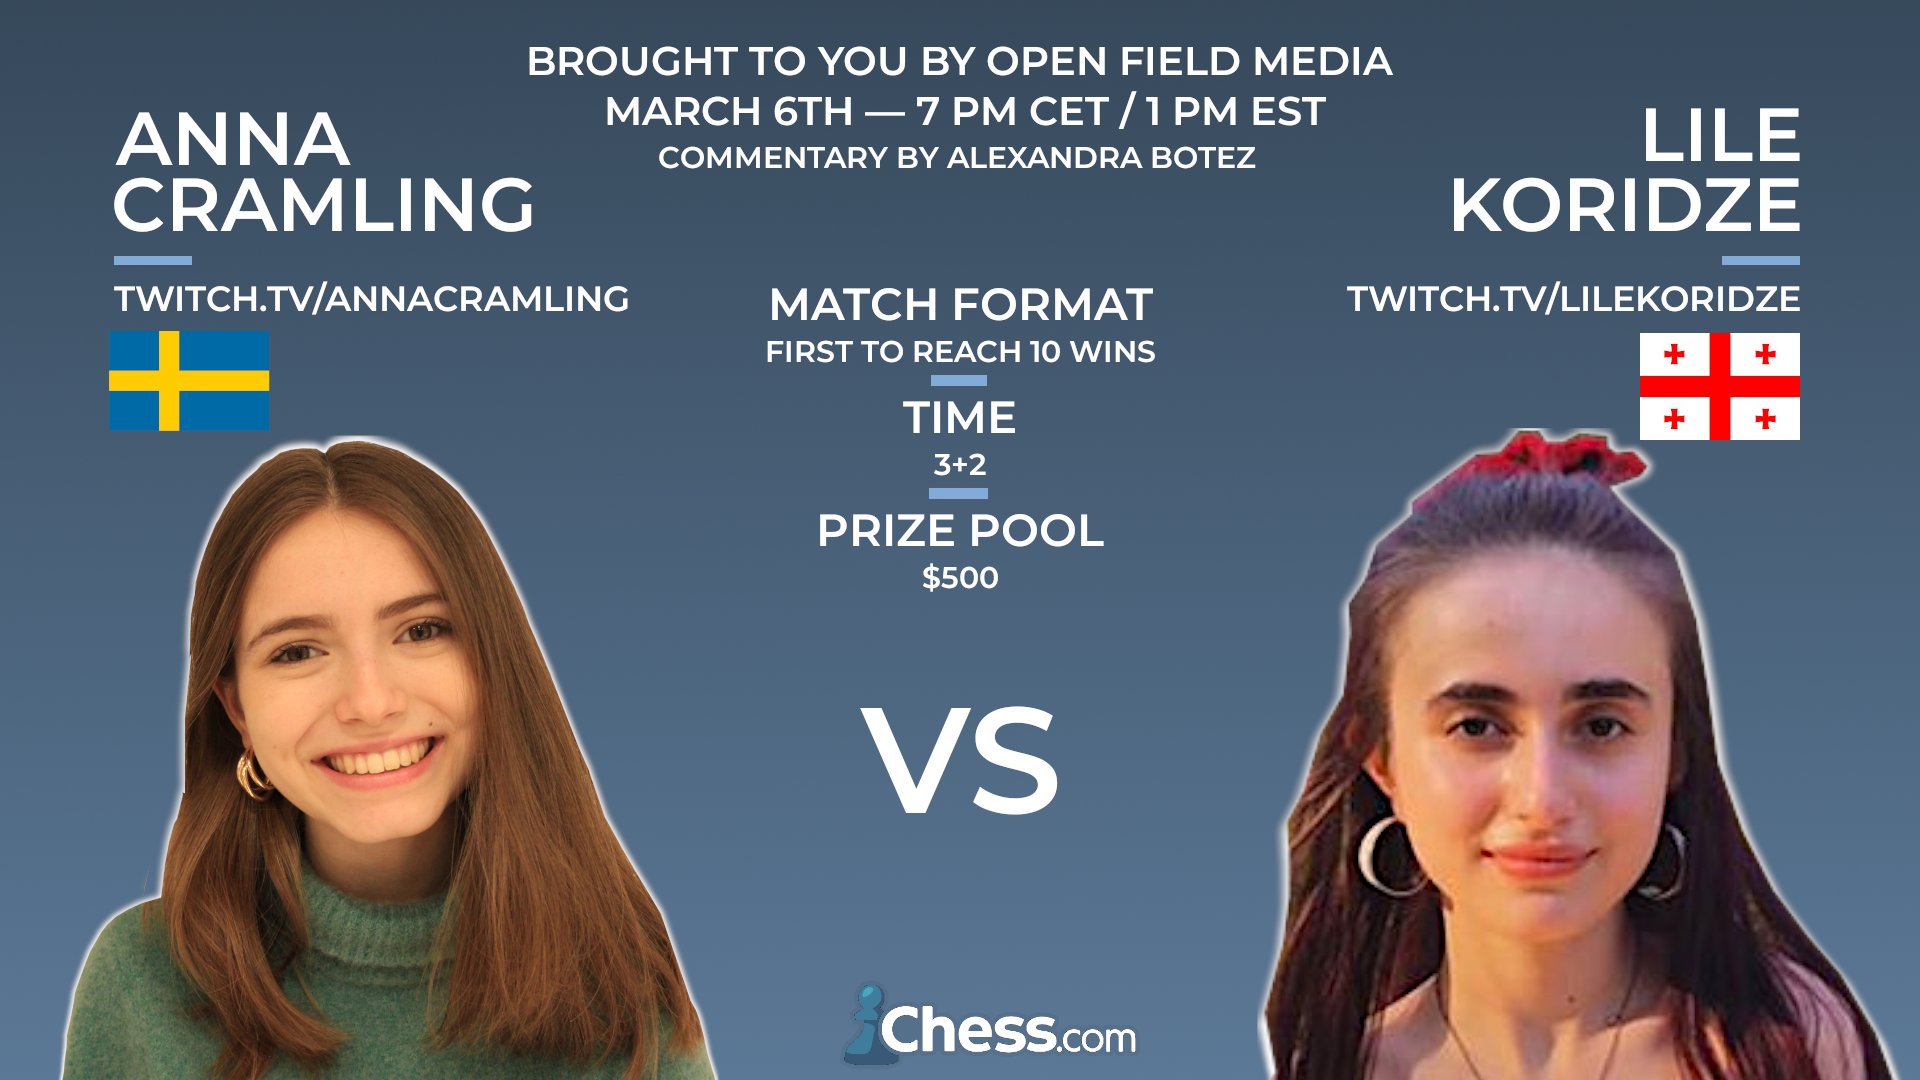 Anna Cramling on X: Only 3 days left until the big match against WFM Lile  Koridze! The match is arranged and sponsored by Open Field Media, and it  will be live commented